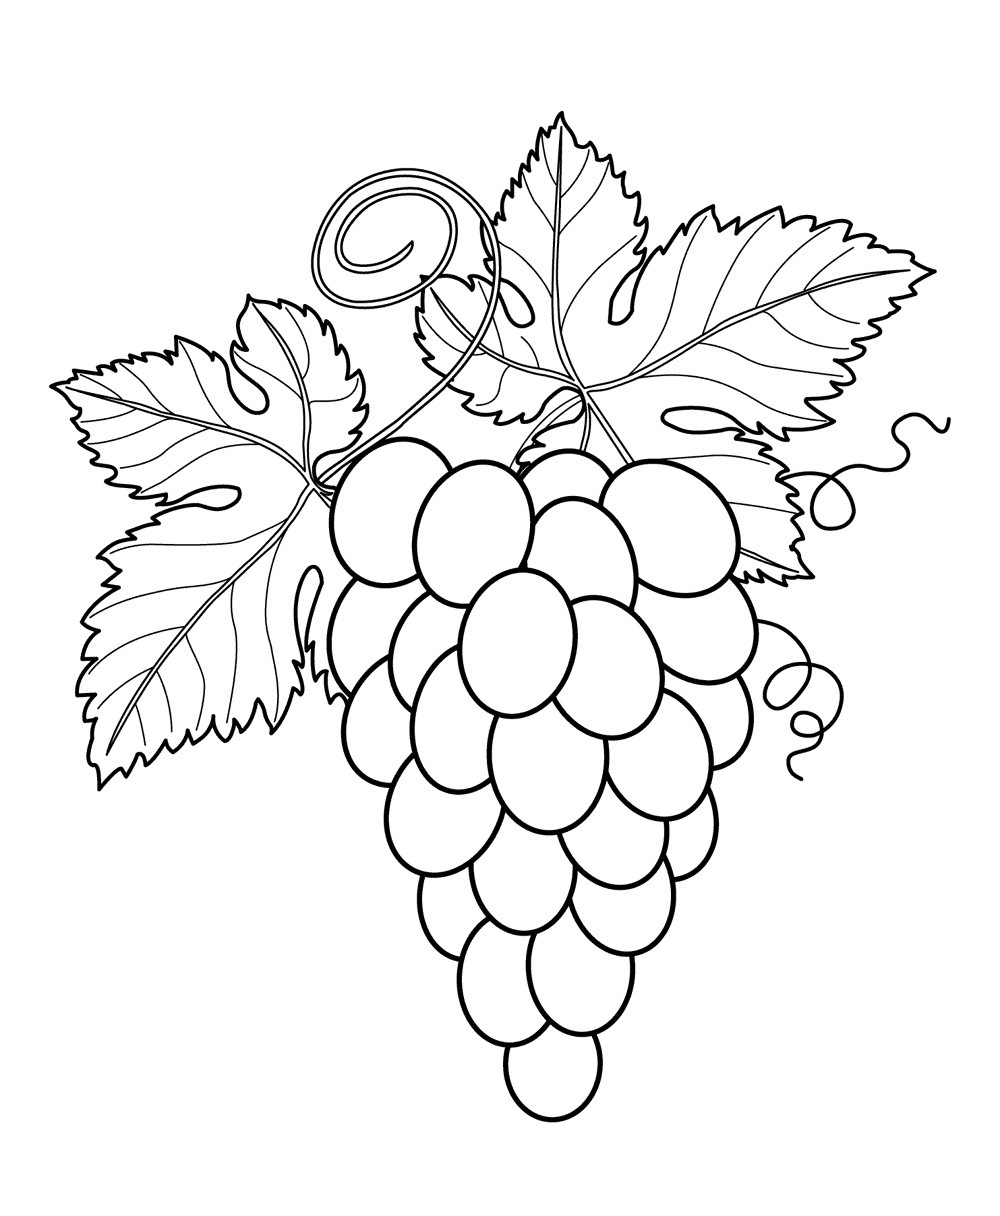 Coloring Book For Kids Fruits
 Fruits Coloring Pages Printable